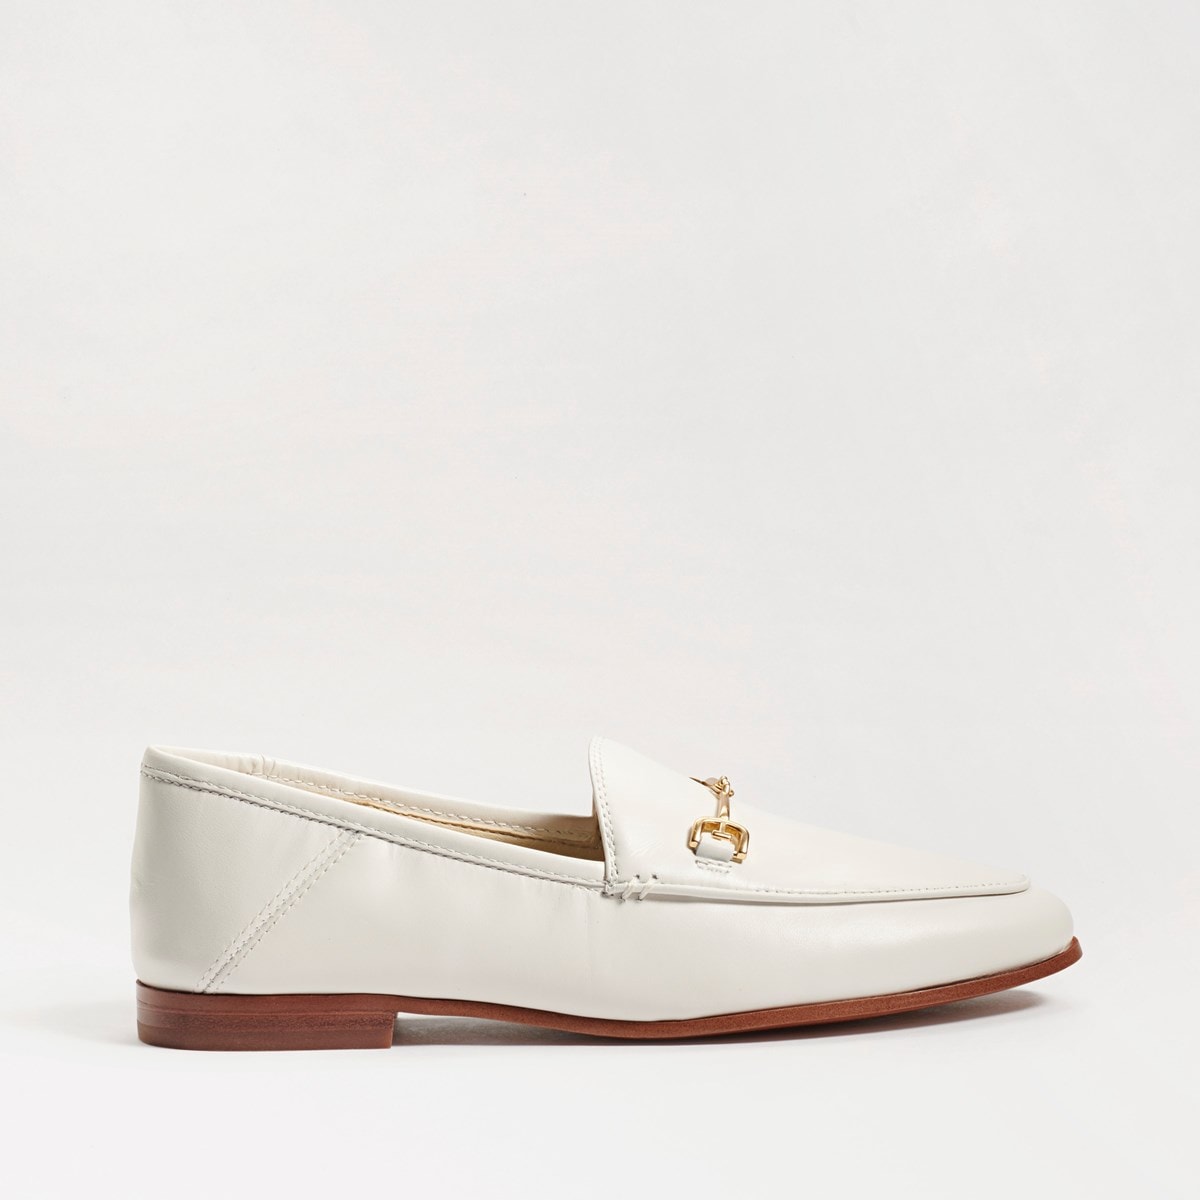 Sam Edelman Loraine Bit Loafer | Women's Flats and Loafers